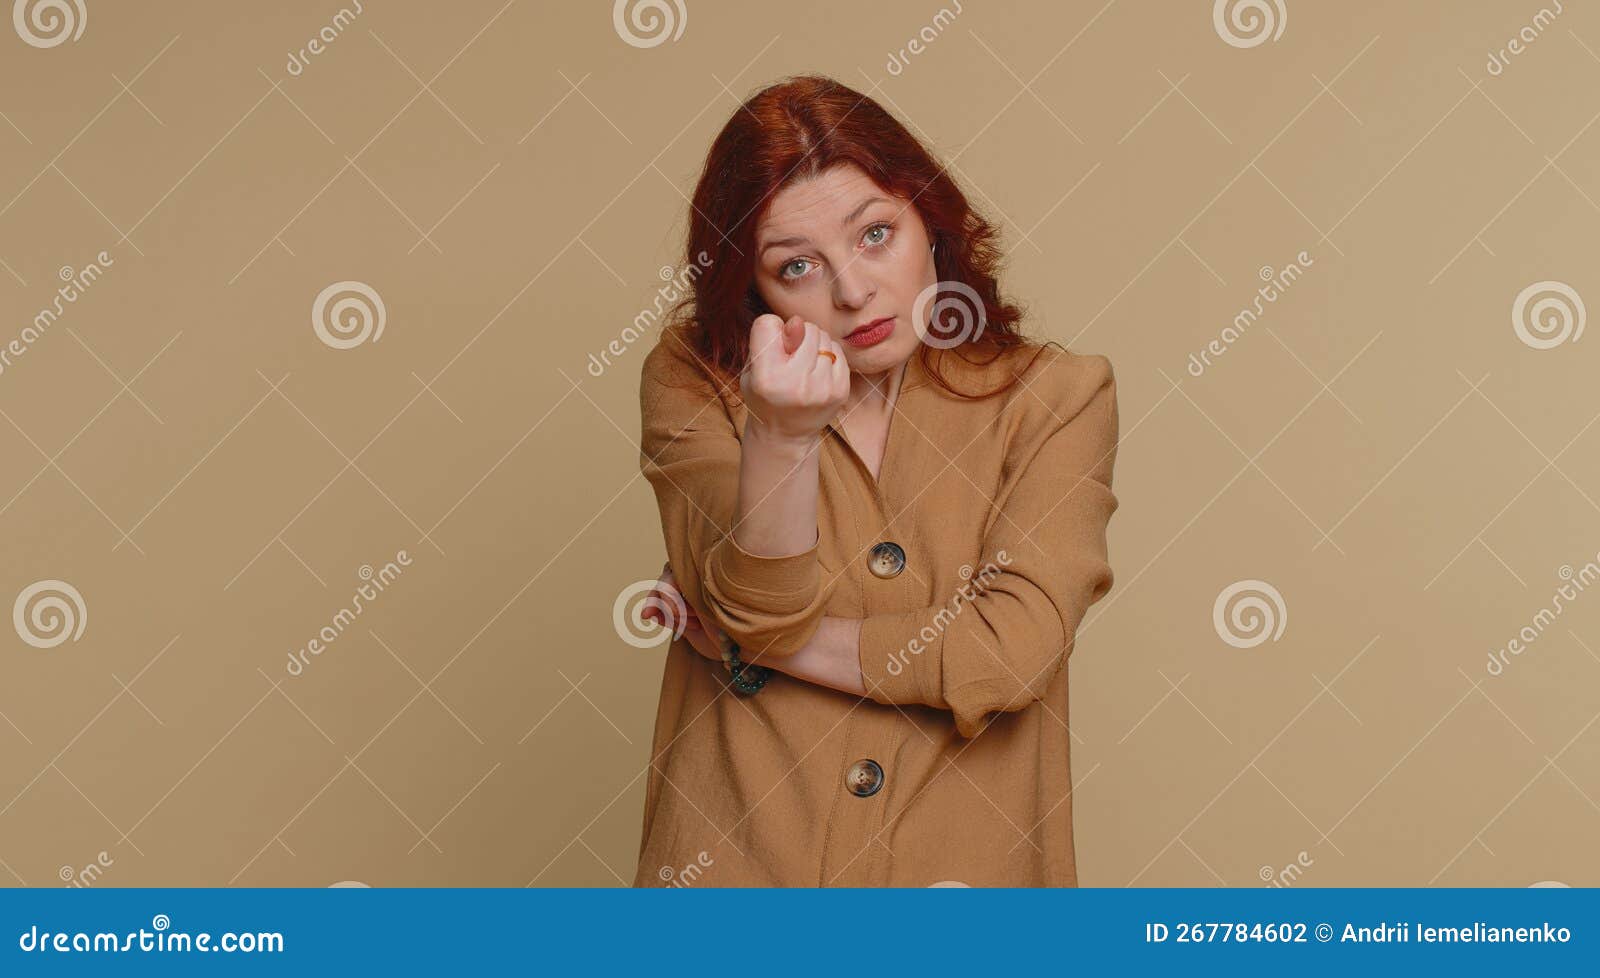 angry aggressive woman showing fig negative gesture, you dont get it anyway, rapacious, avaricious